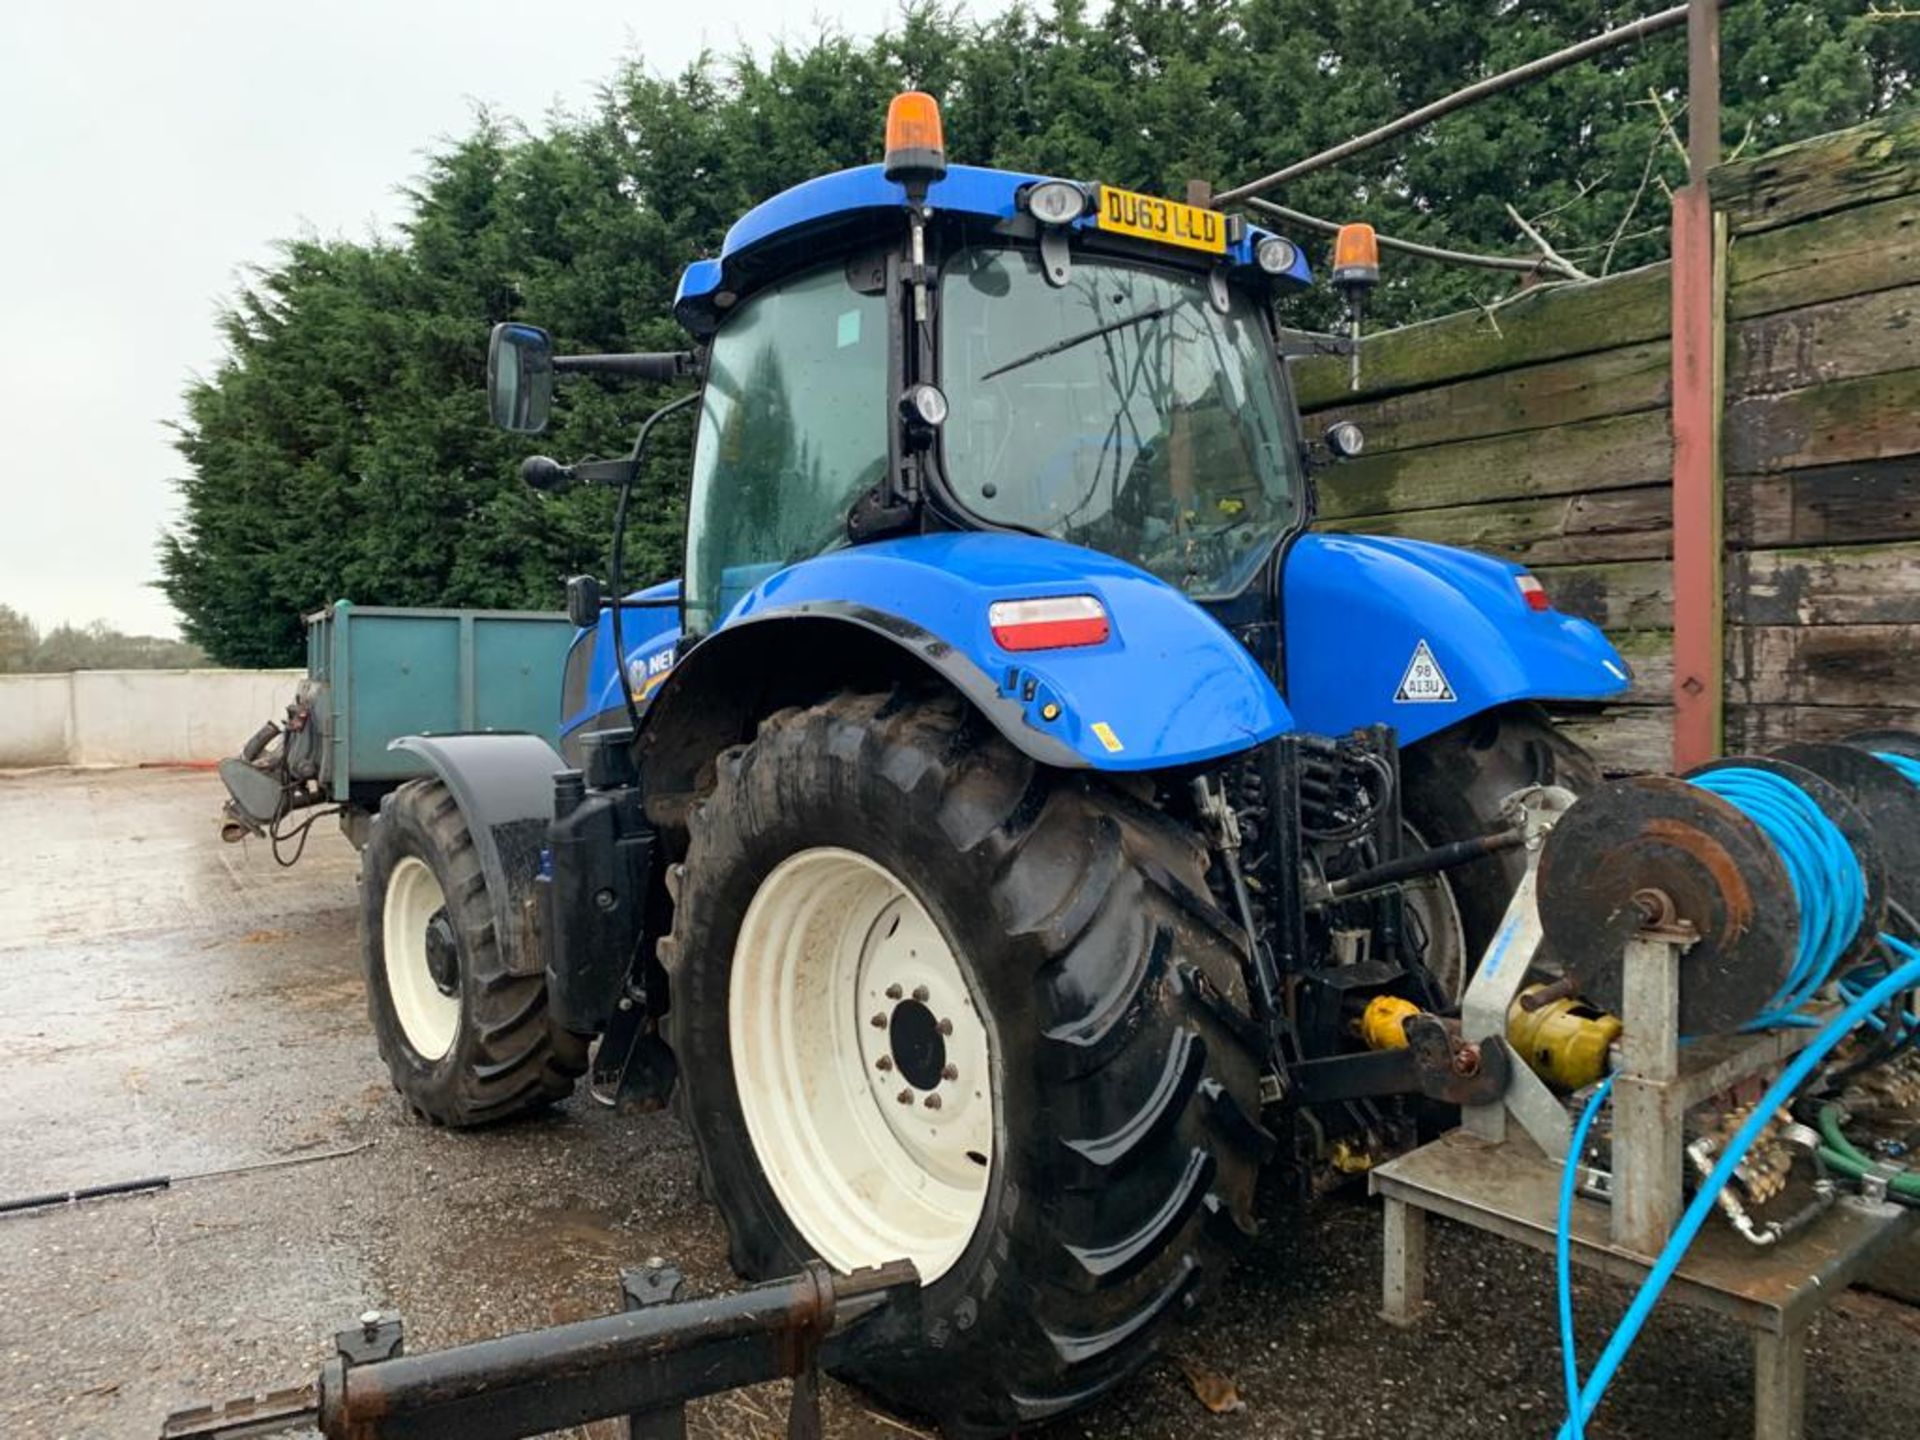 2013/63 REG NEW HOLLAND T7.200 TRACTOR, SHOWING 1 FORMER KEEPER, RUNS AND WORKS AS IT SHOULD. - Image 5 of 16